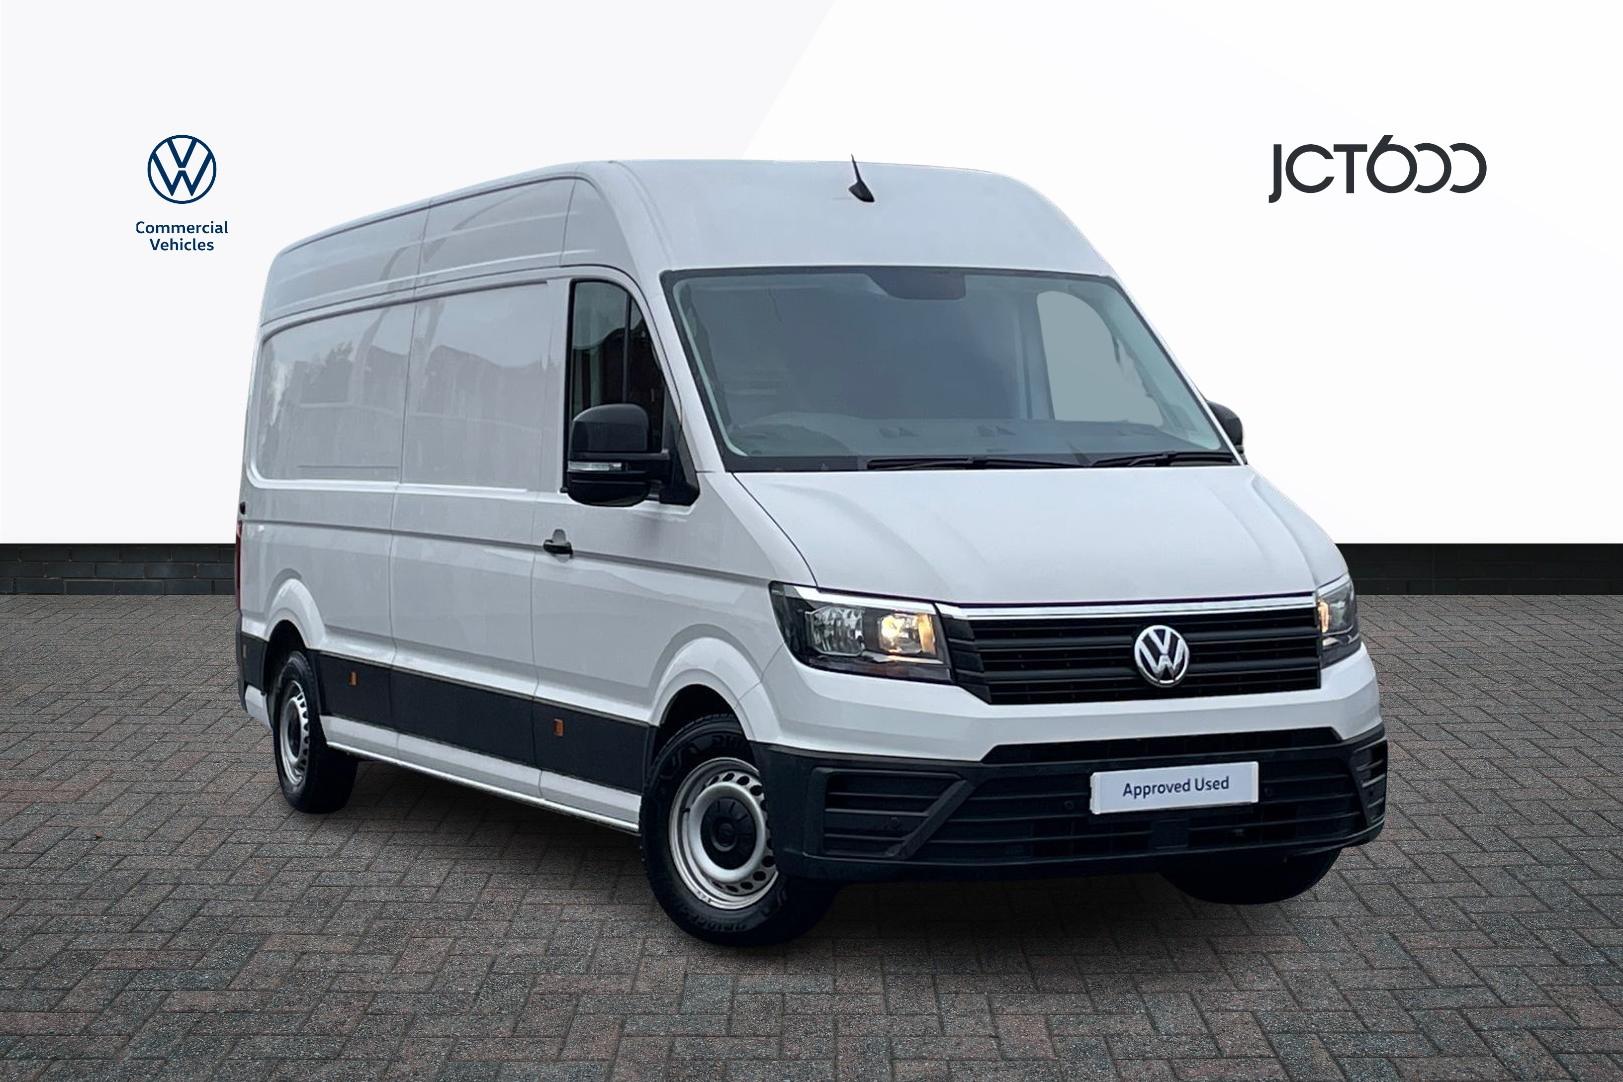 2022 VOLKSWAGEN Crafter CR35 LWB FWD 2.0 TDI 140PS Trendline High Roof Van  £32,450 19,110 miles Candy White